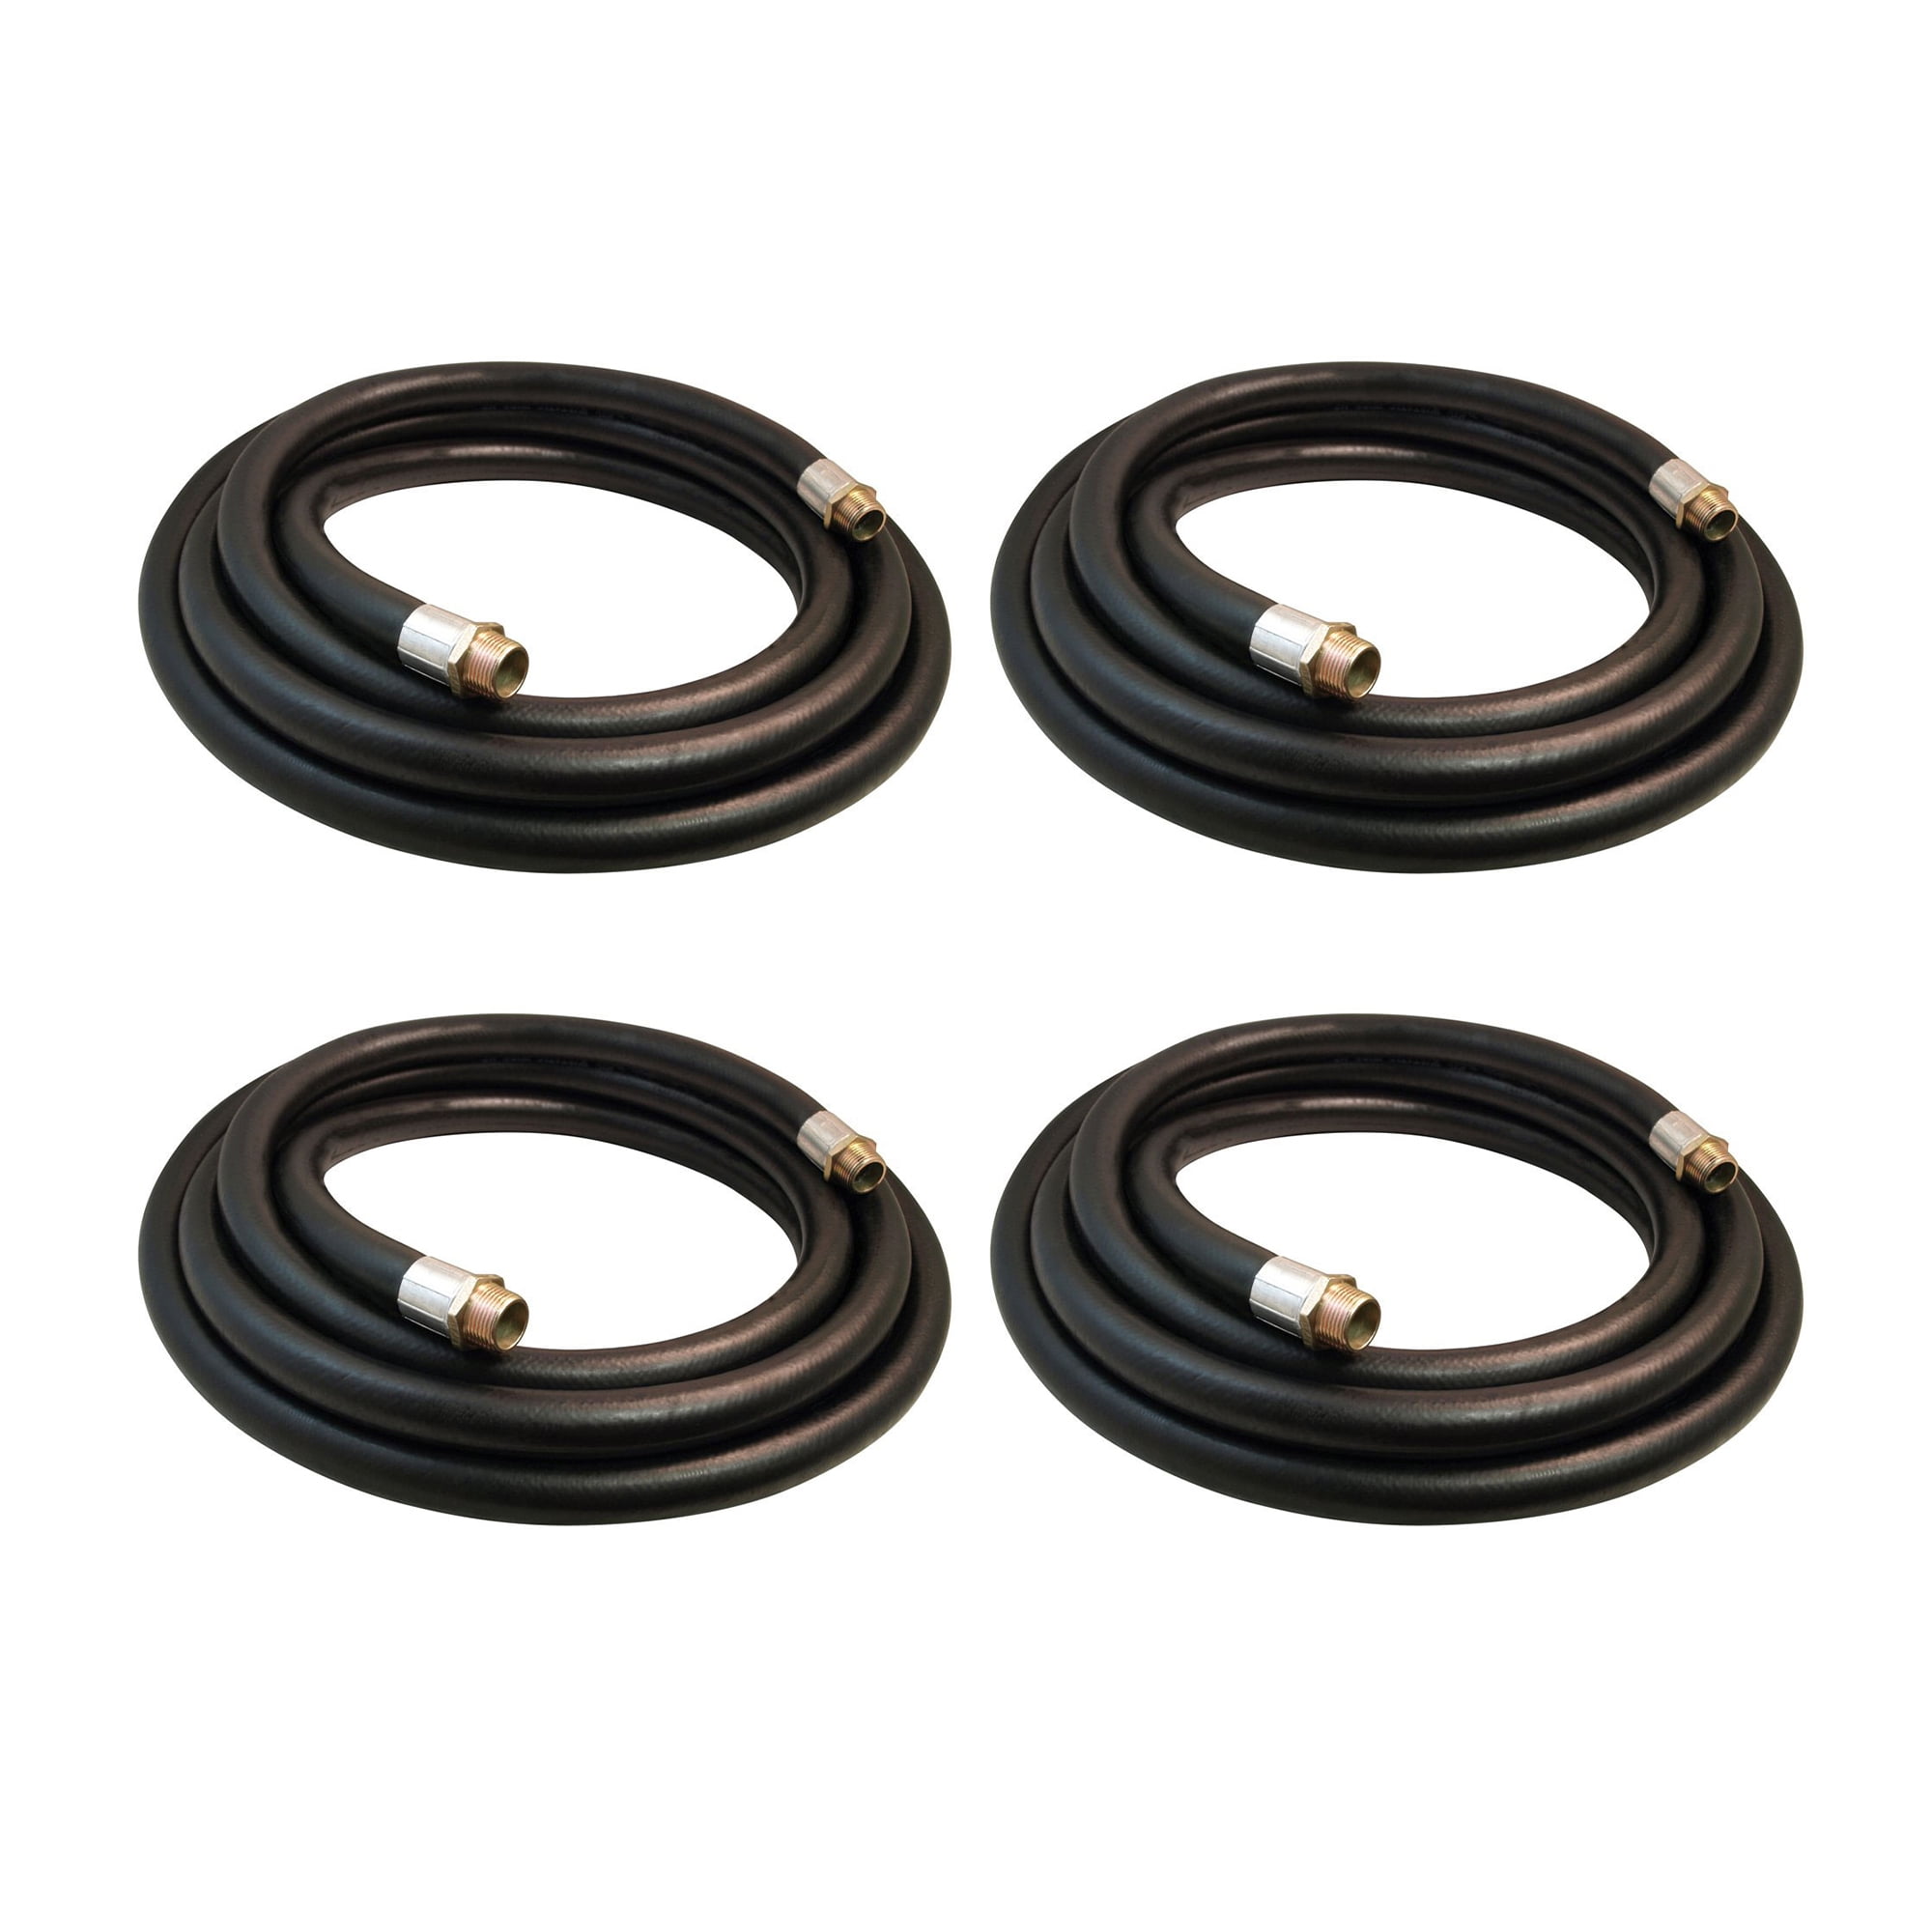 Black Apache 1 Inch Diameter 20 Foot Length Farm Fuel Gasoline Oil Diesel Tractor Transfer Hoses for Personal and Professional Use 4 Pack 